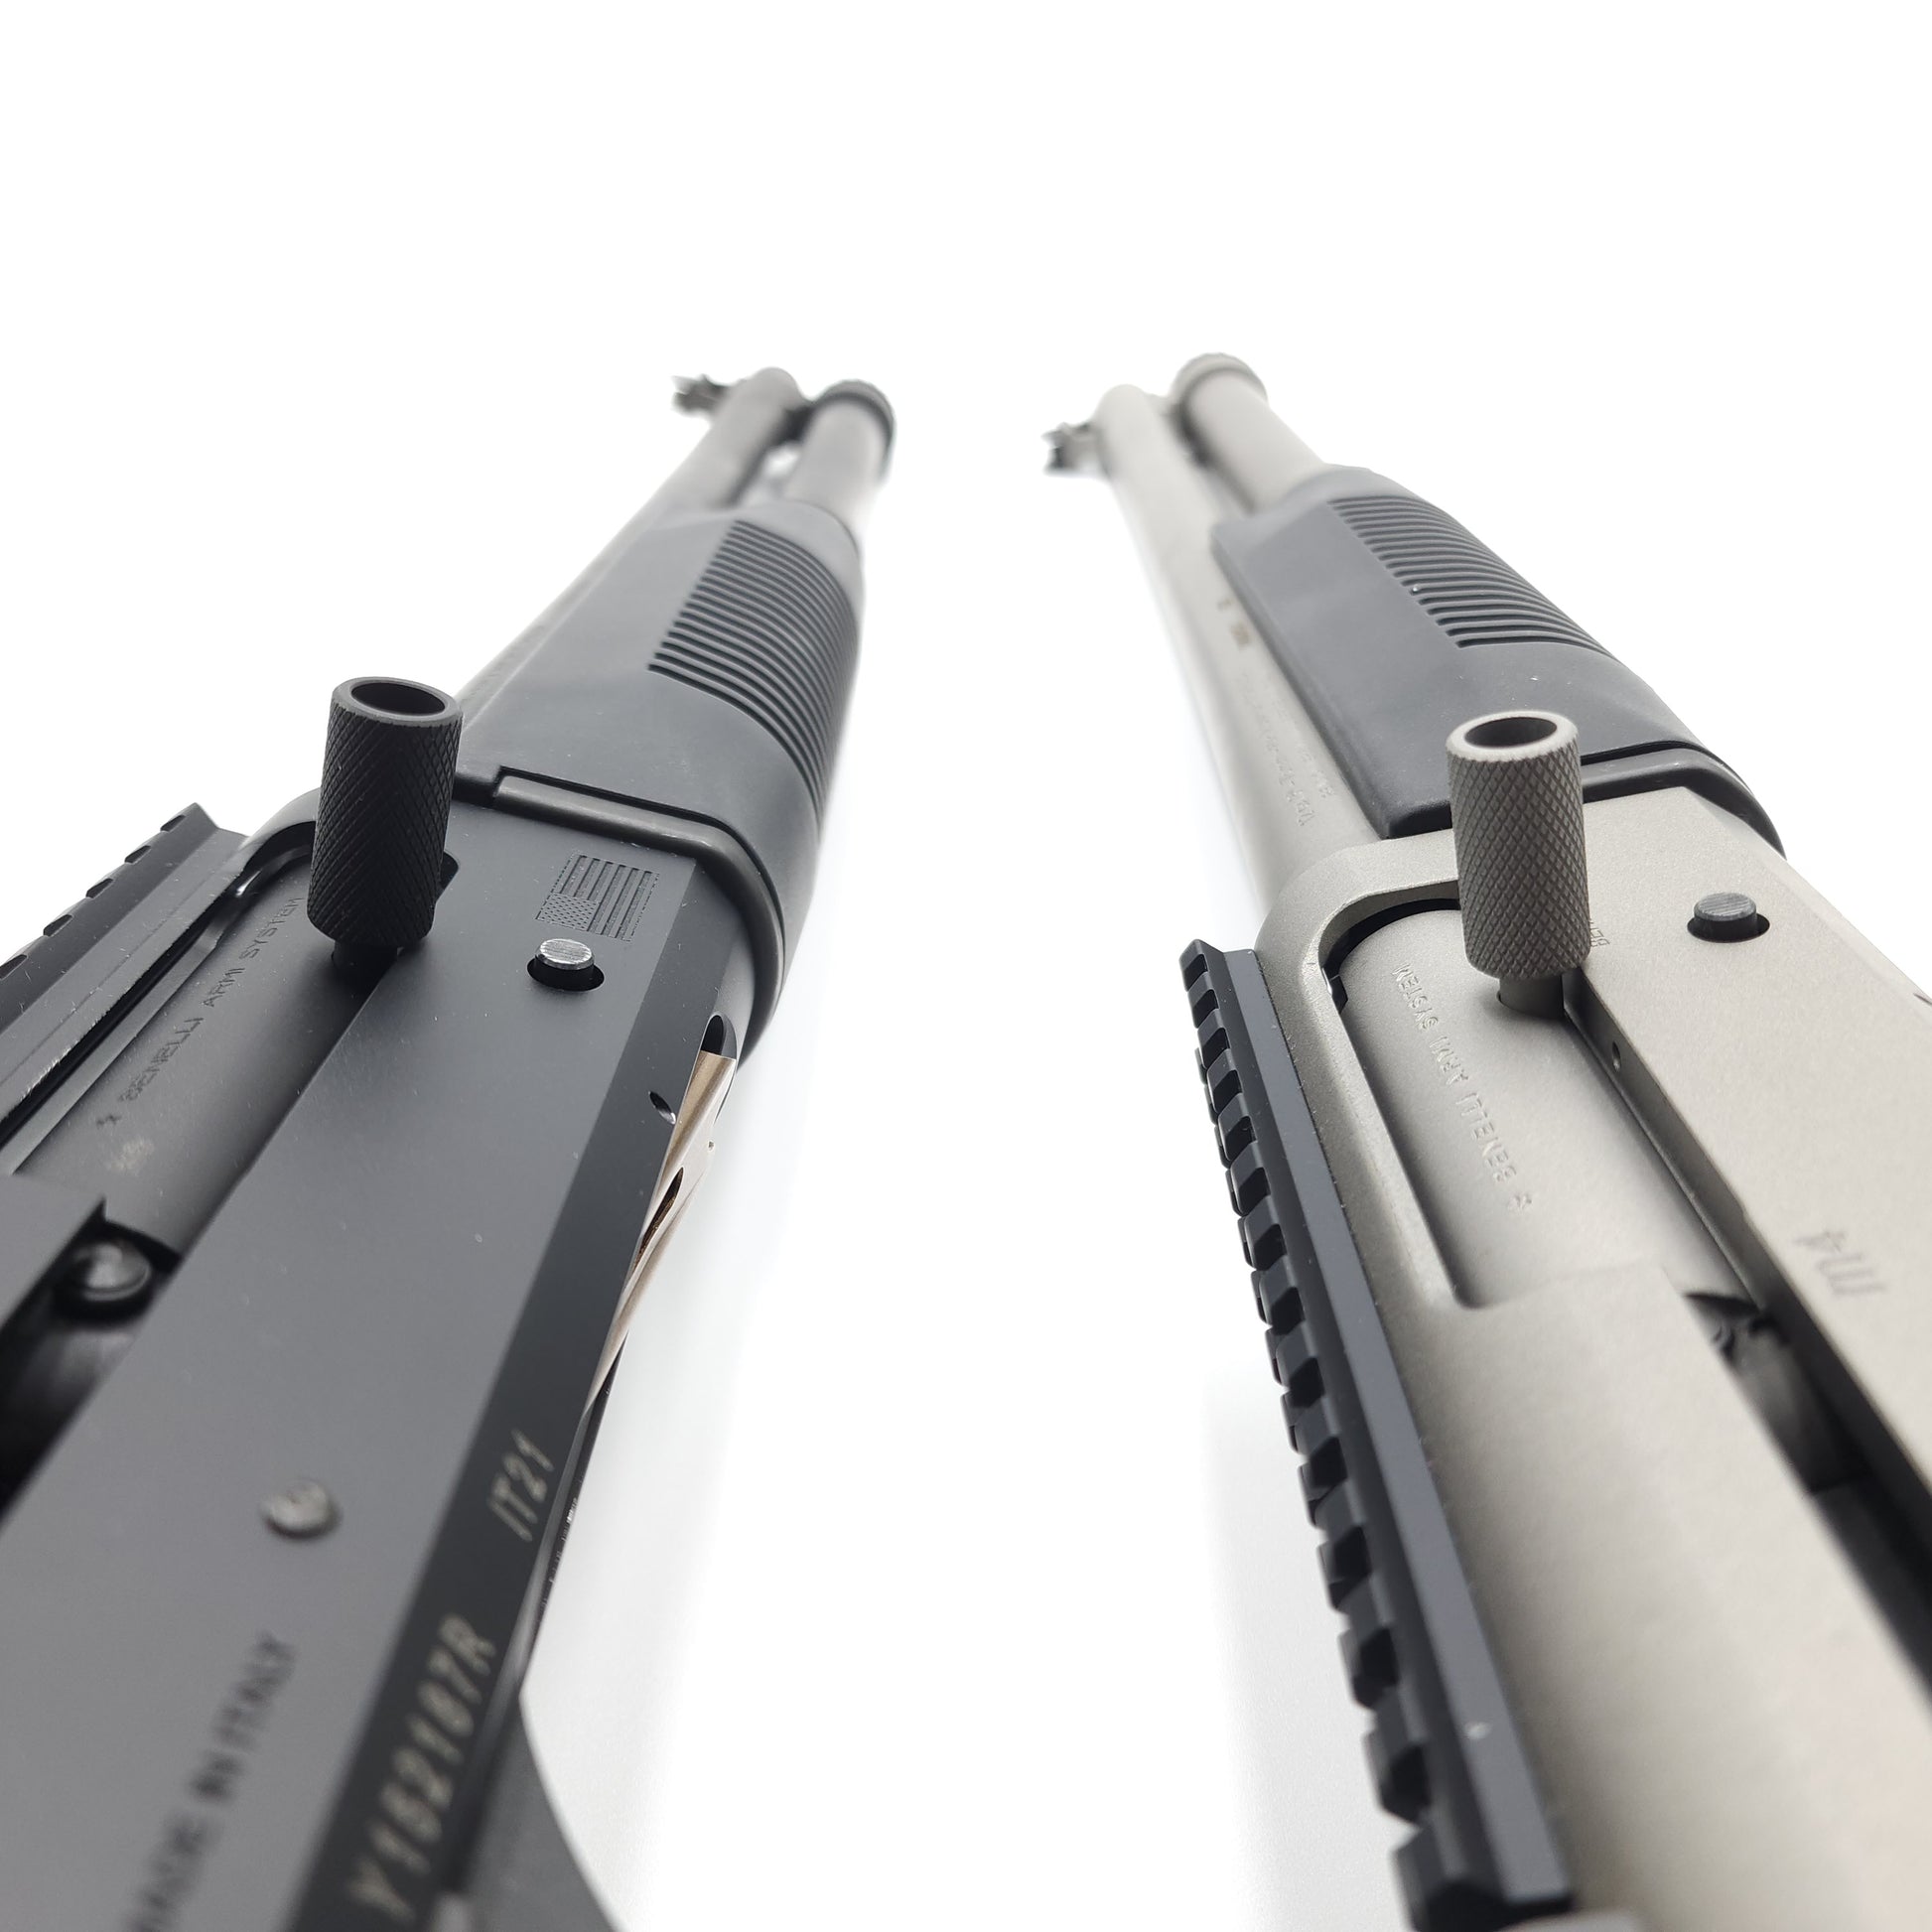 Benelli M4 Charging Handle side by side